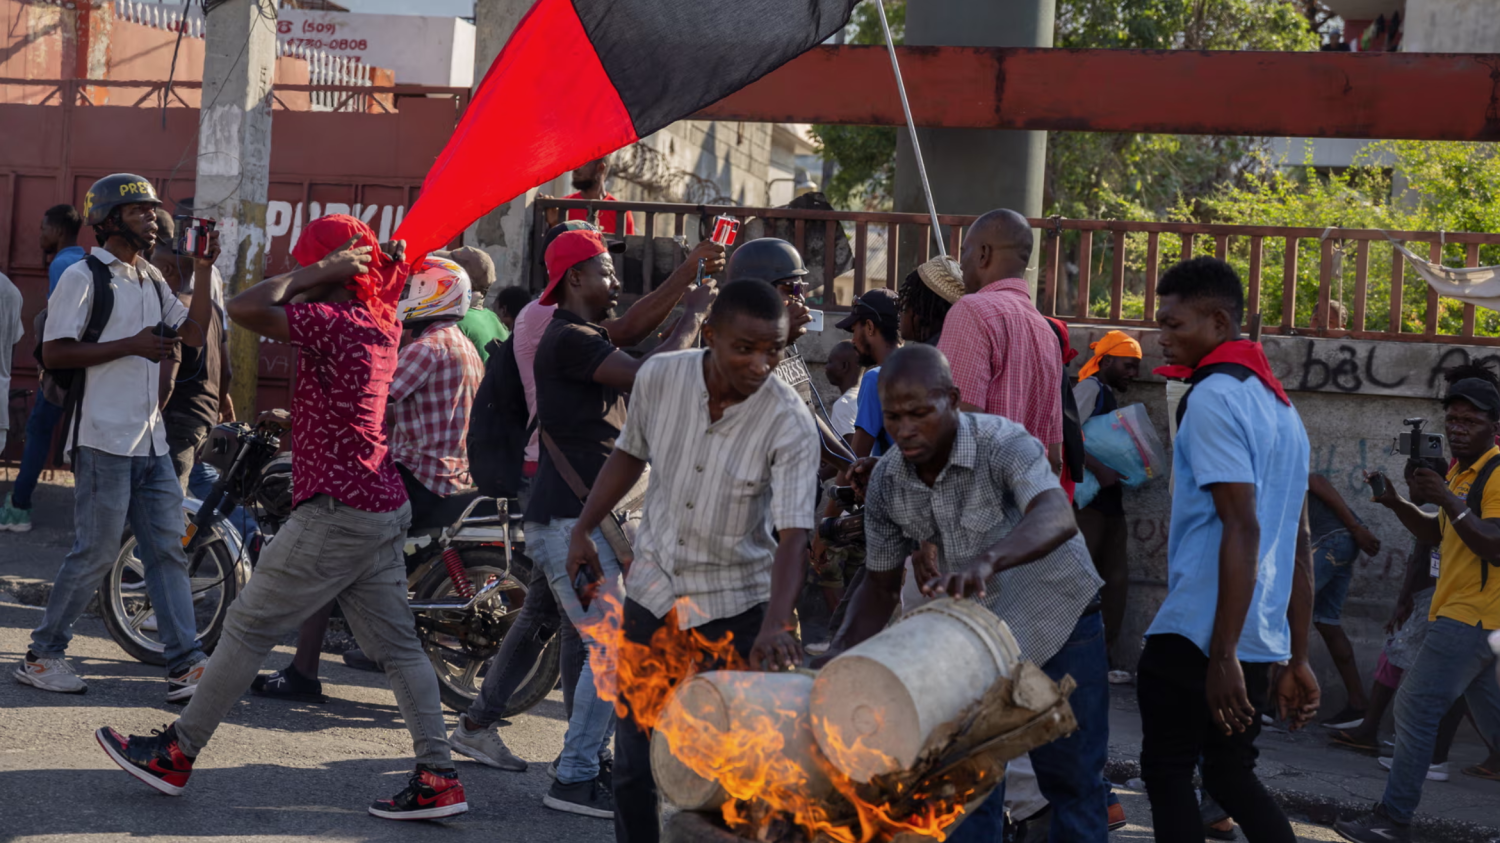 Haiti: what caused the gang violence and will it end now the PM has quit